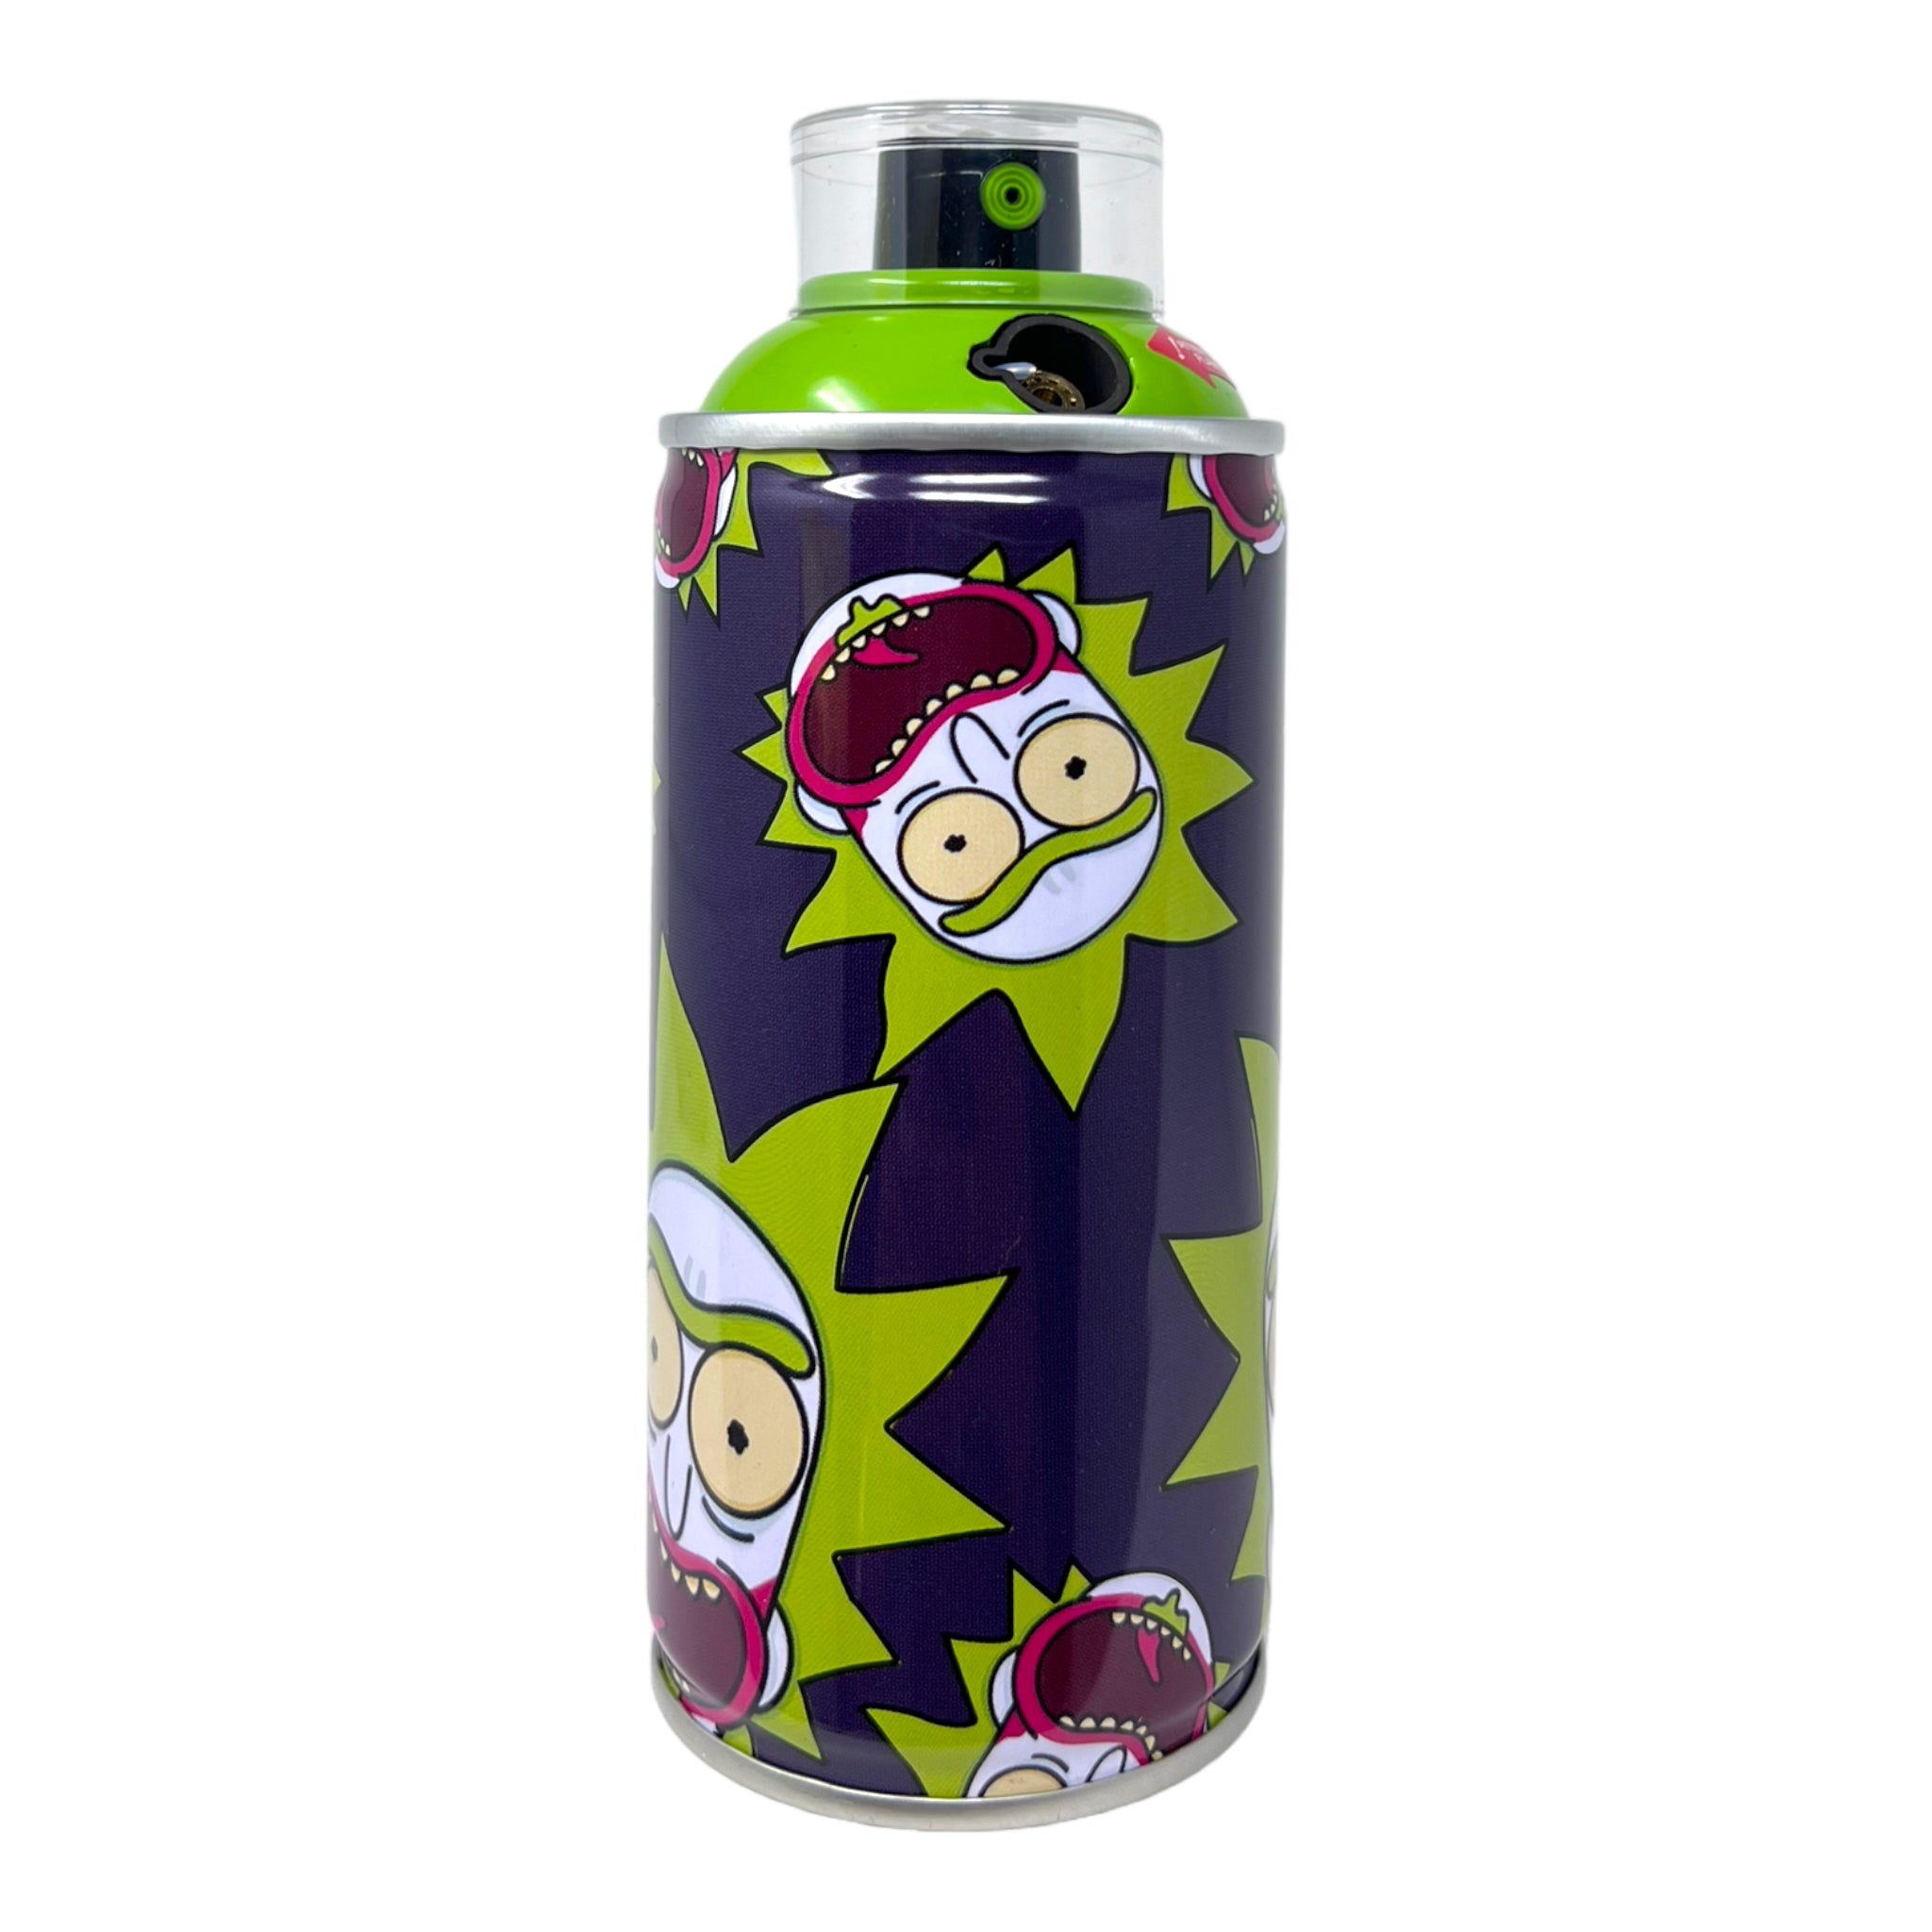 Rick Small Spray Can Torch